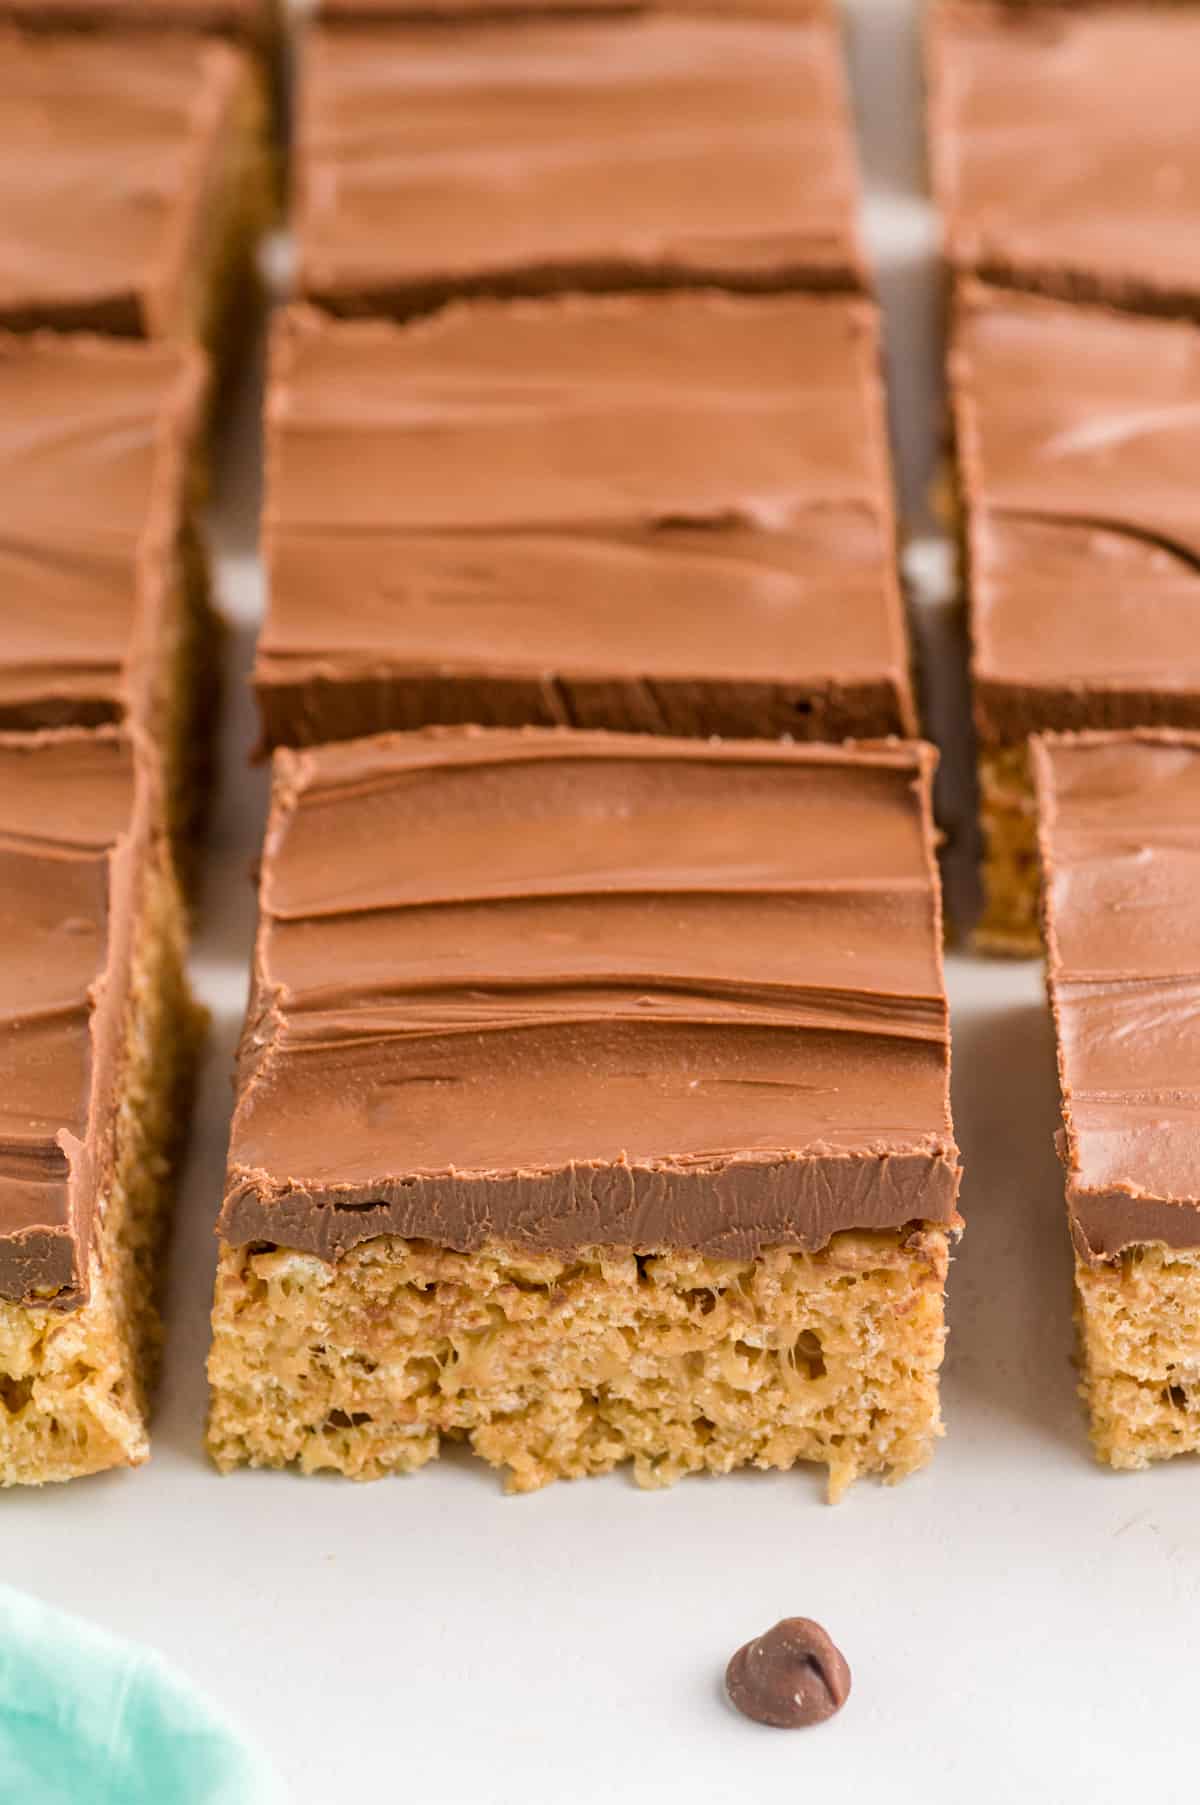 Peanut butter rice krispie treats with chocolate topping sliced and lined up neatly.